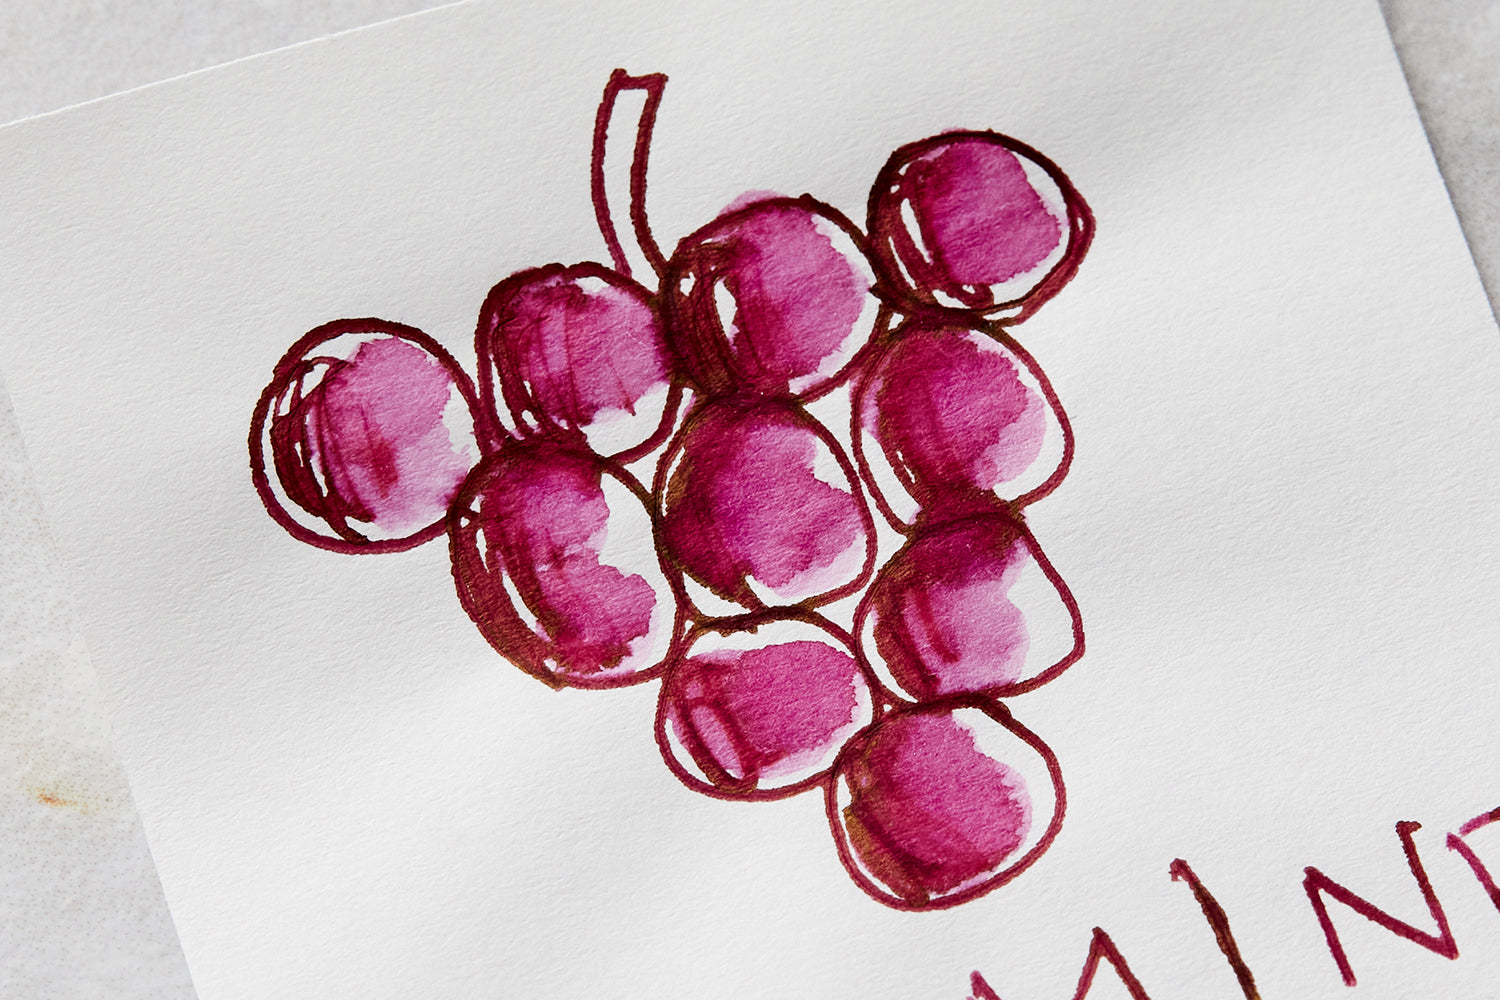 Diamine Syrah fountain pen ink drawing sample on white paper